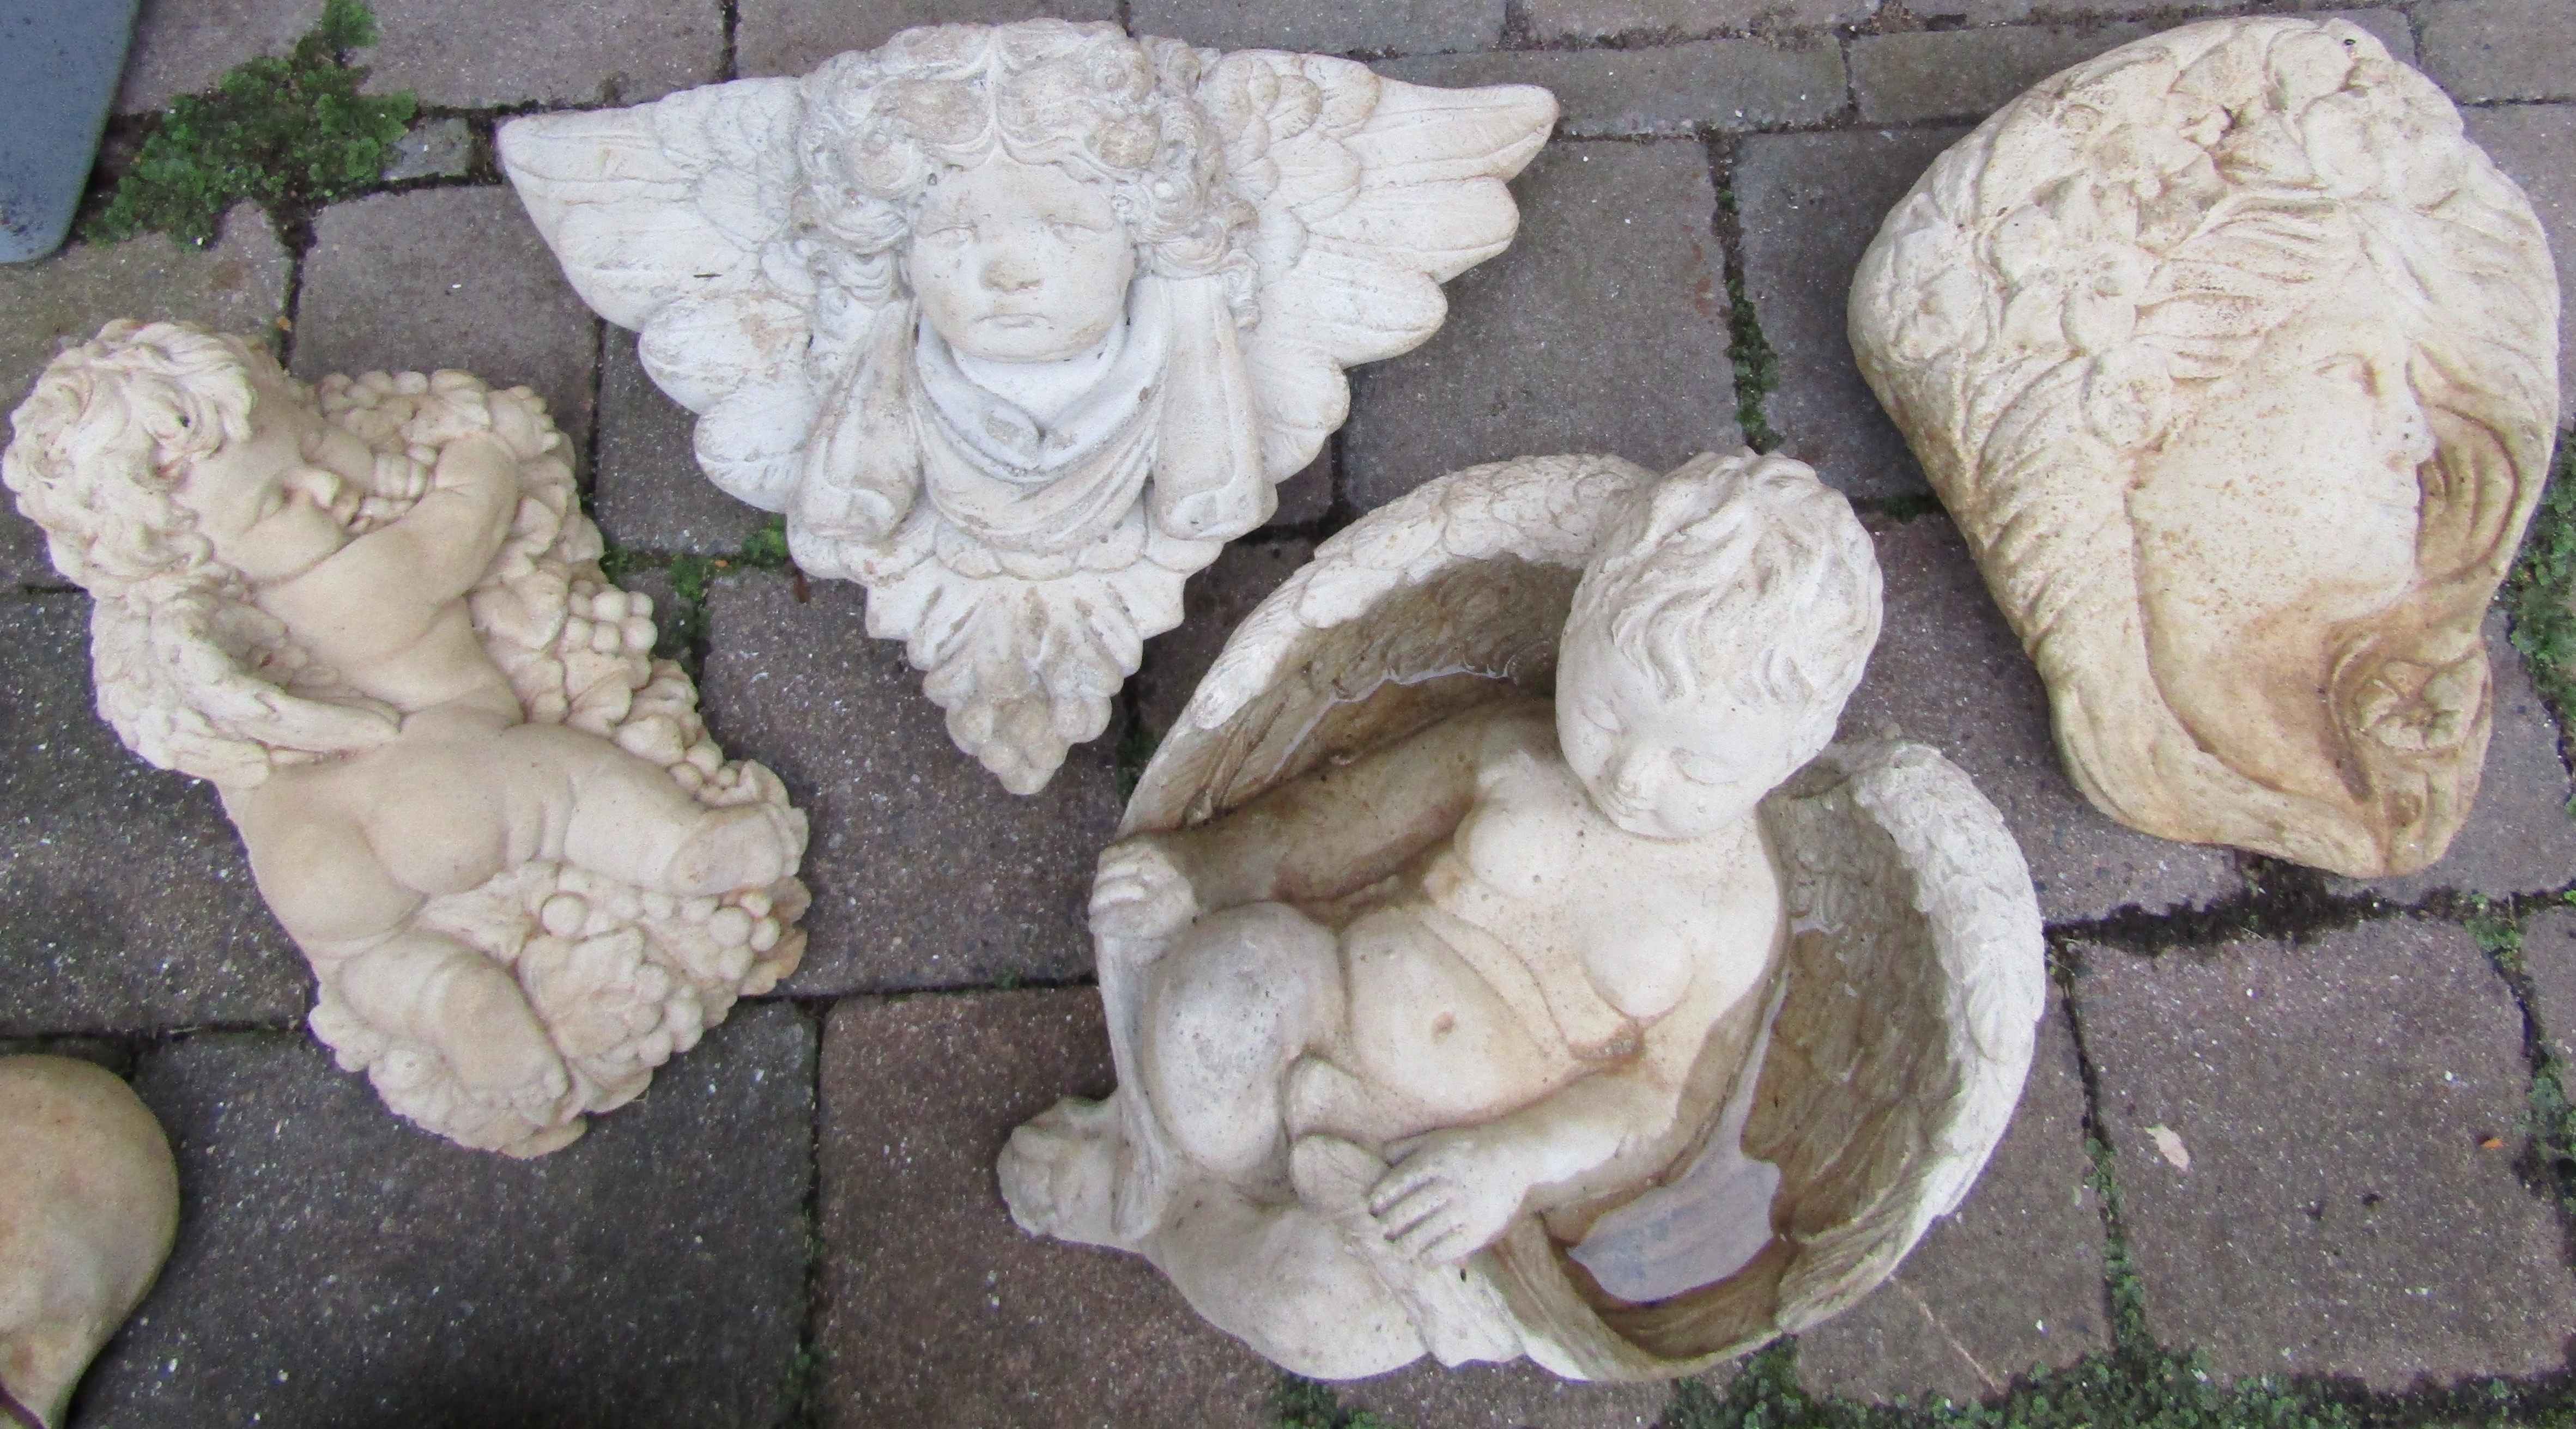 Selection of decorative concrete garden items:- Bacchus cherub lying on a bed of grapes, Cherub's